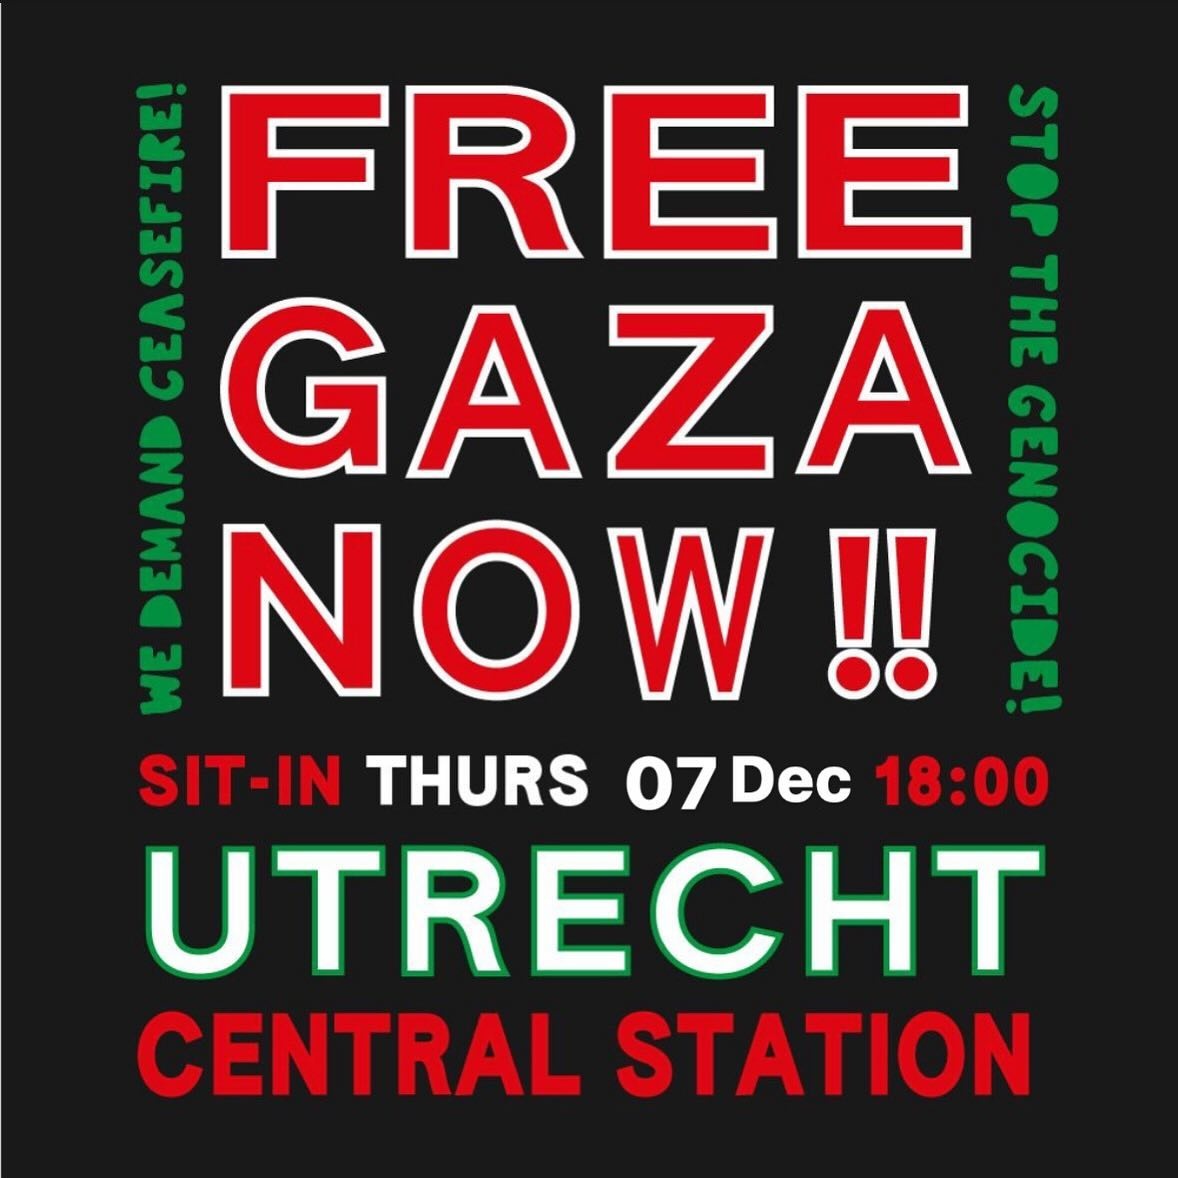 FREE GAZA NOW !!

WE DEMAND CEASEFIRE! 
STOP THE GENOCIDE!

SIT-IN THURS 07 Dec 18:00
UTRECHT
CENTRAL STATION